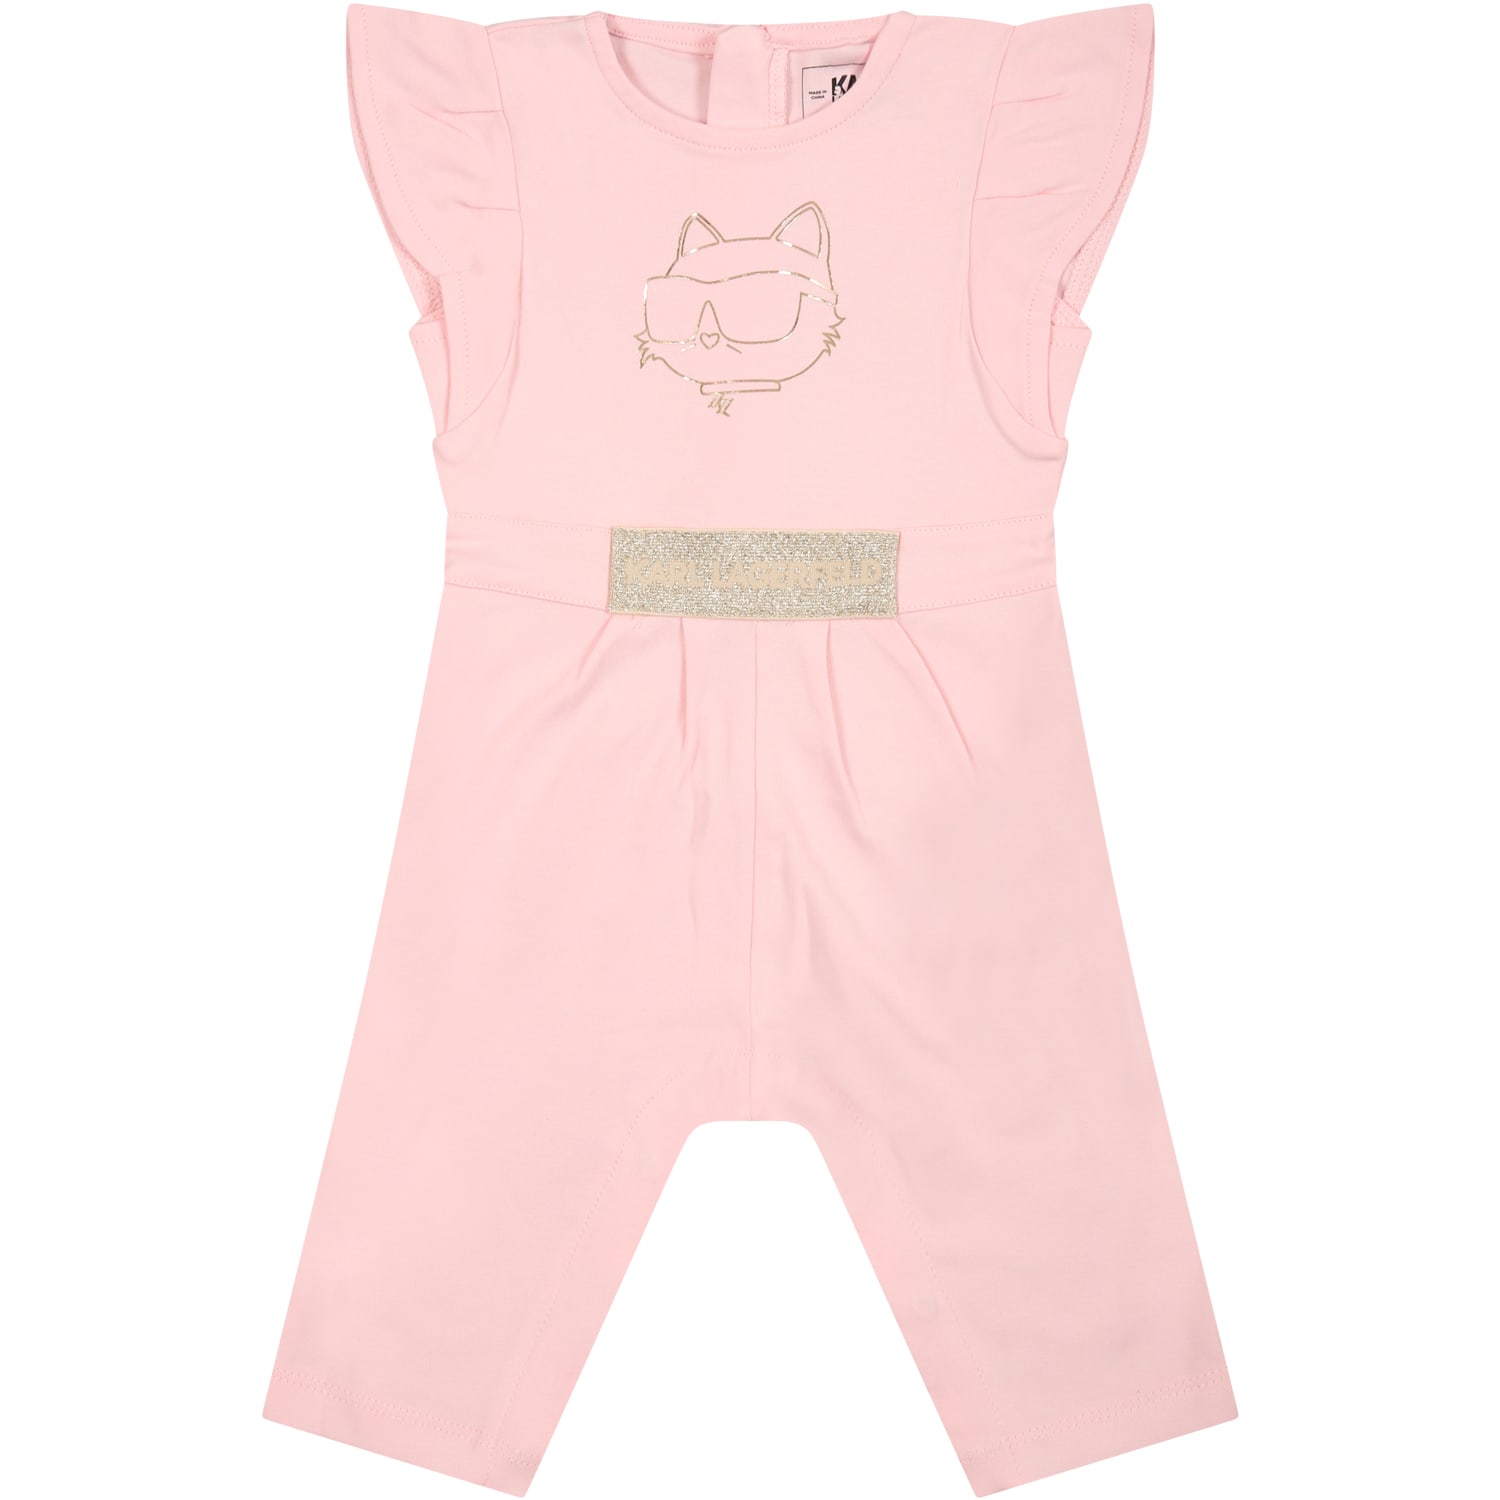 Karl Lagerfeld Pink Onesie For Baby Girl With Lurex Print And Logo ...